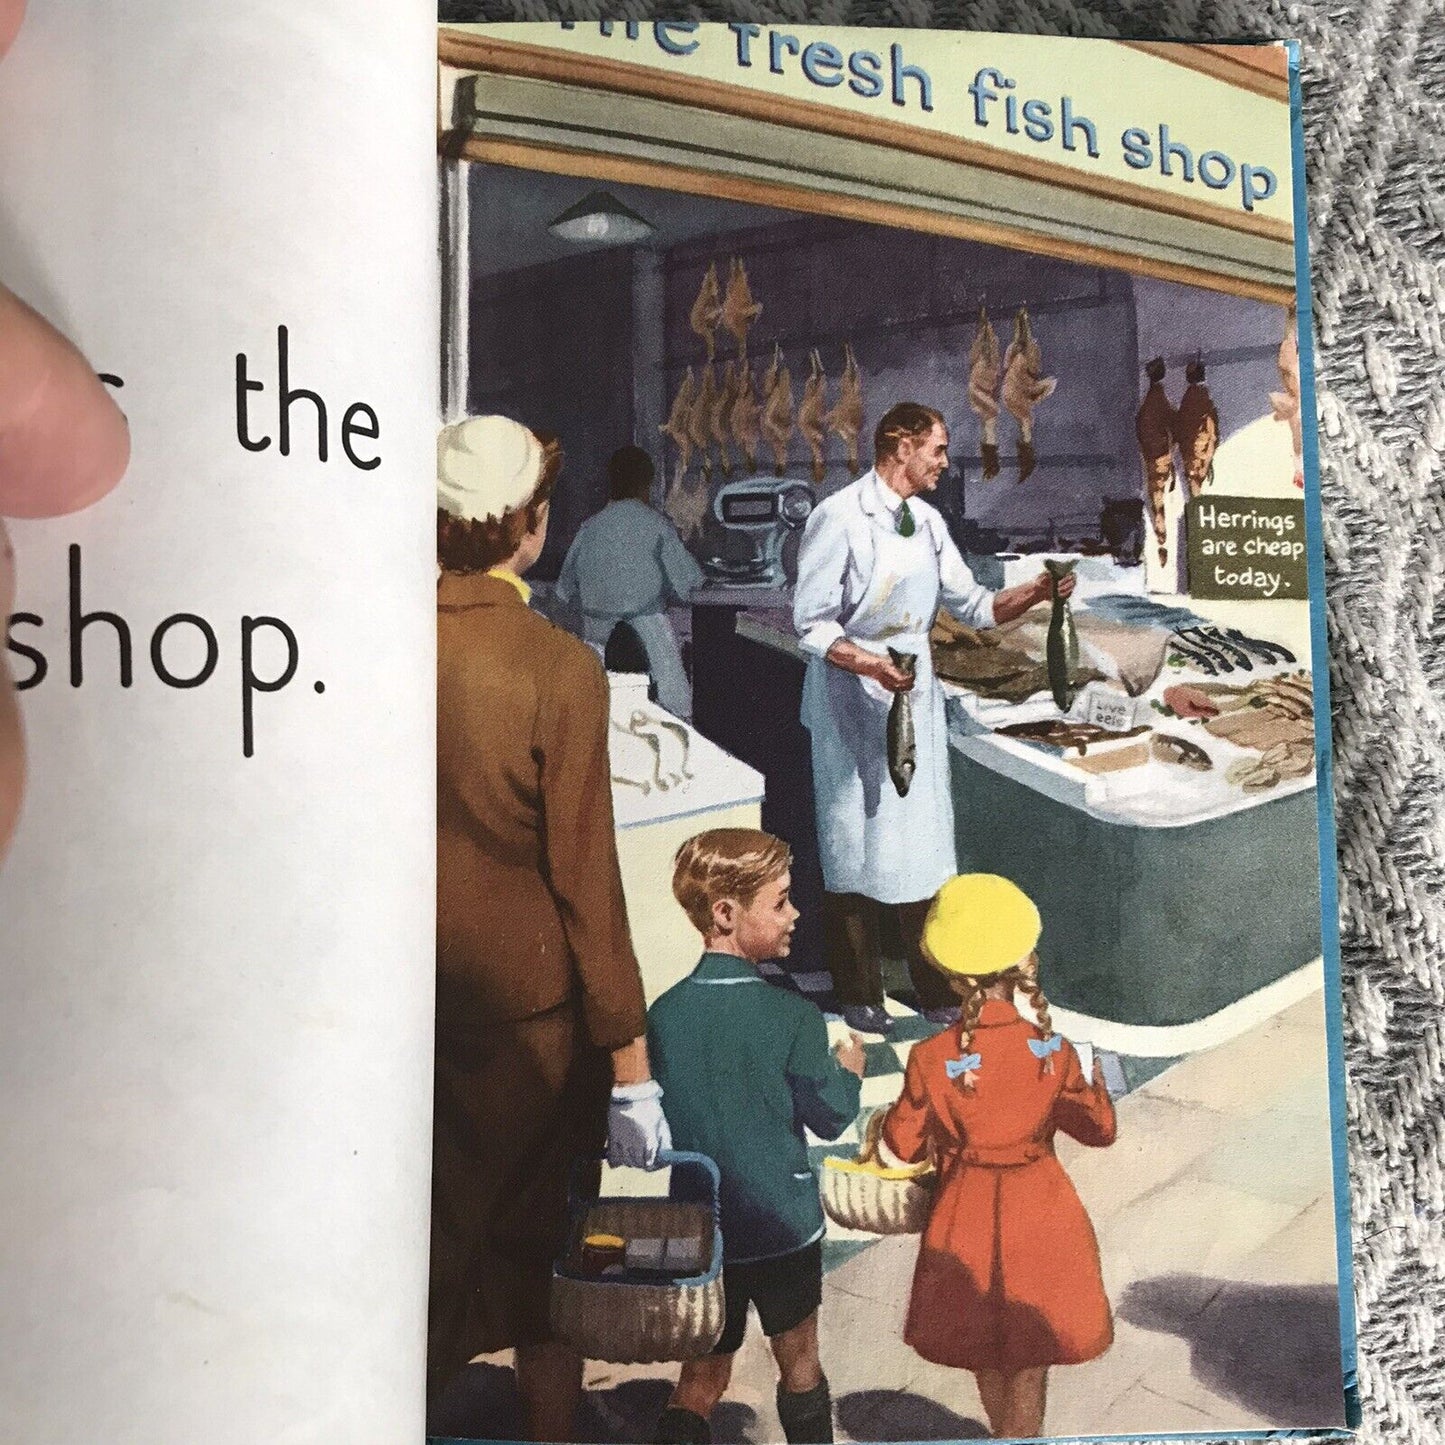 1958 Shopping With Mother(Series 563) ME Gagg (Ladybird)Wills & Hepworth